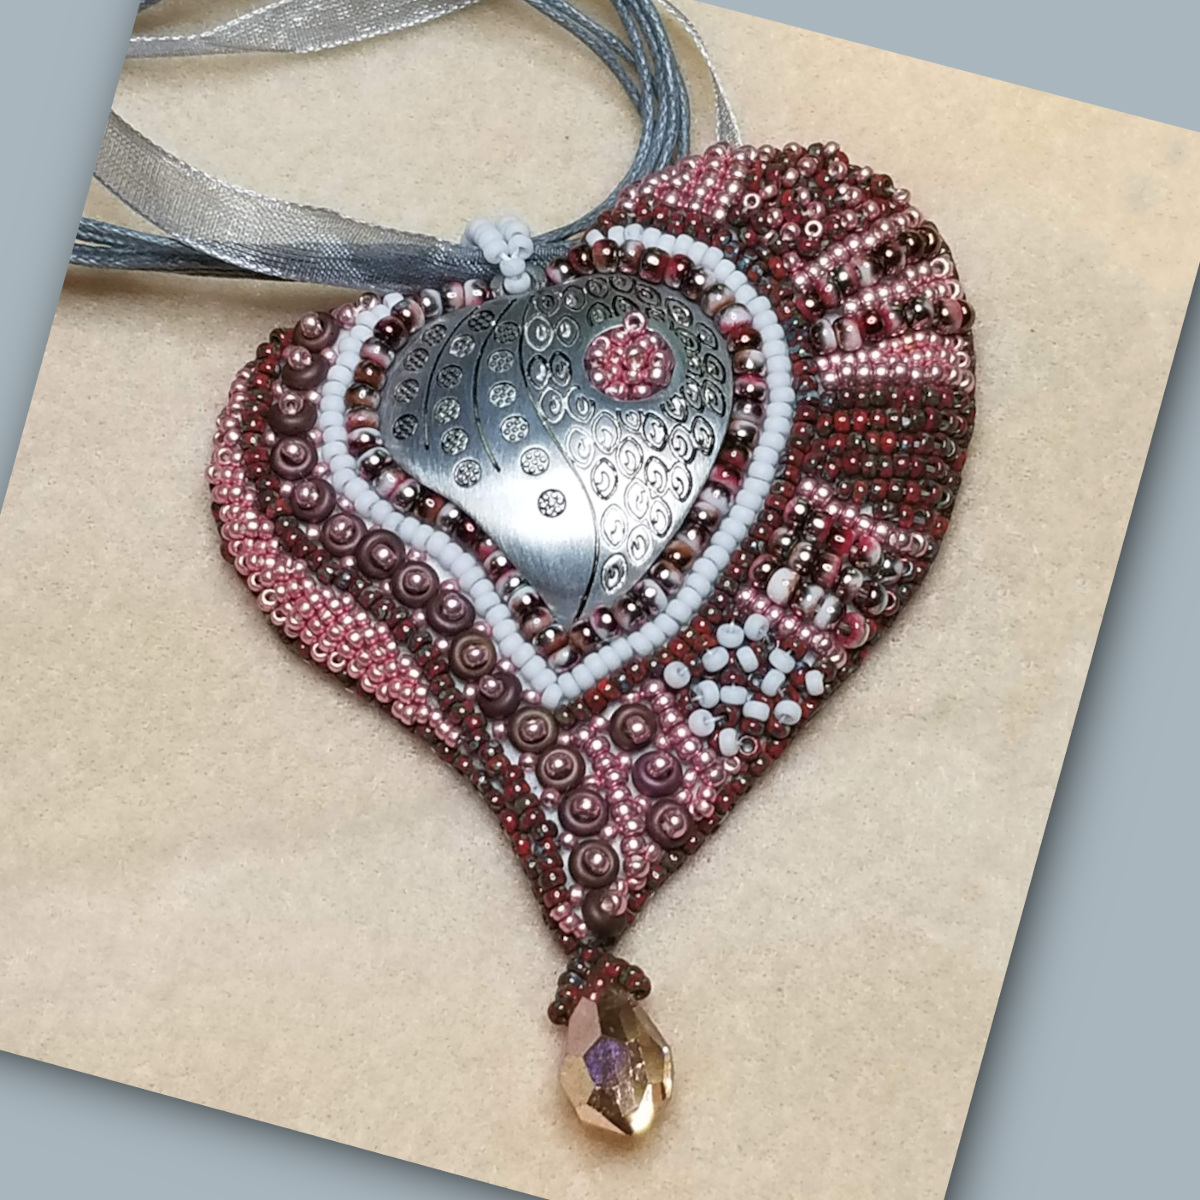 Heart pendant by Amy Castine